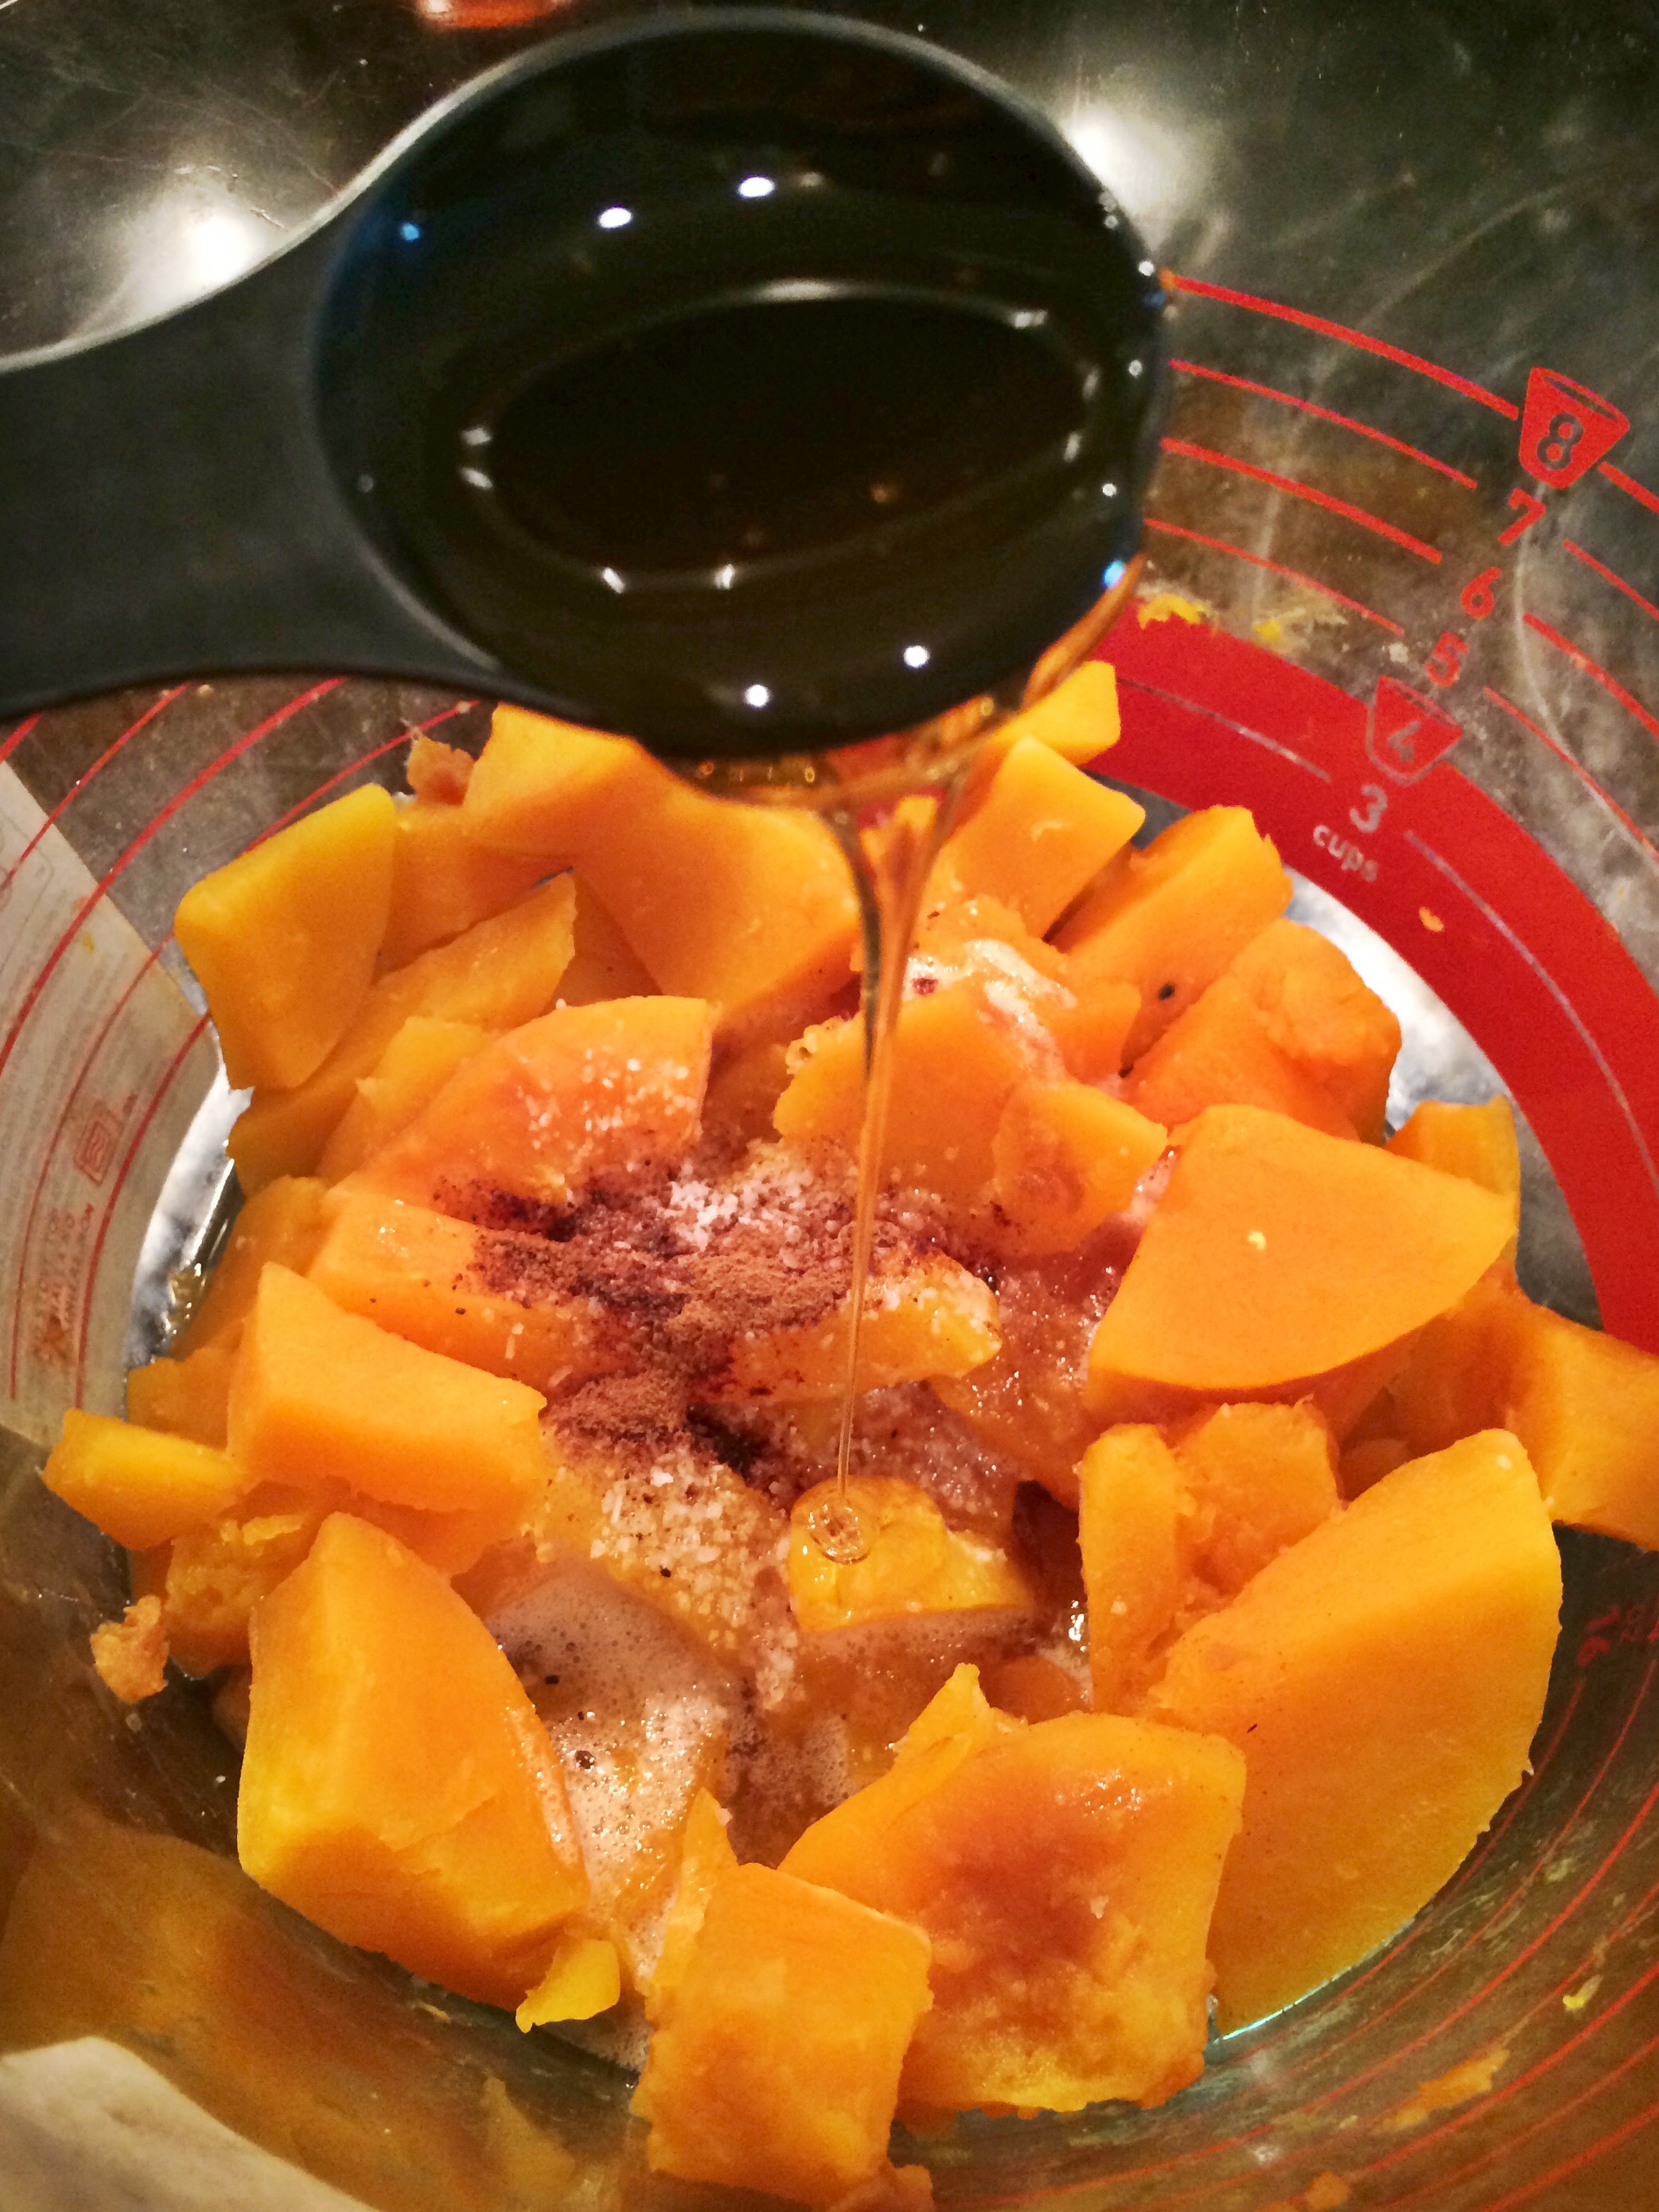 What is a microwave recipe for butternut squash?